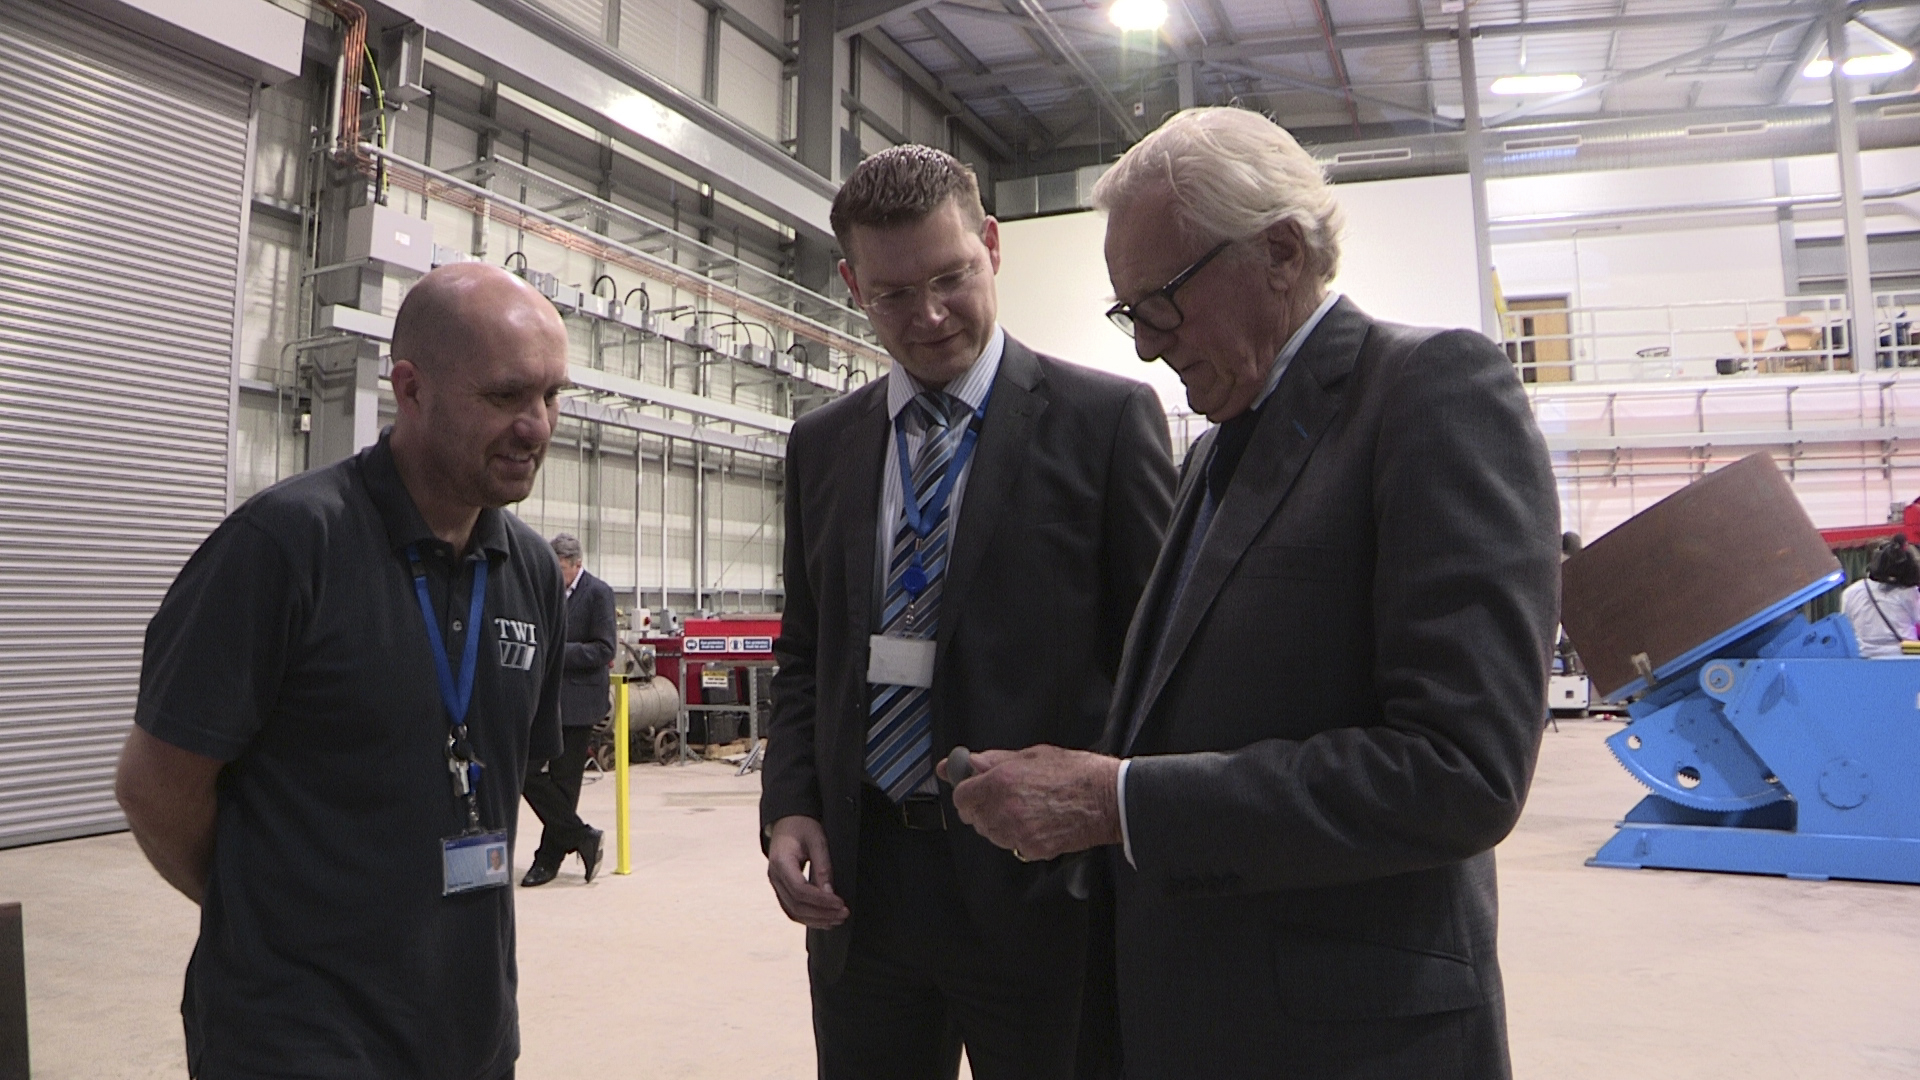 TWI's David Tennant, Mike Russell and Lord Heseltine discuss electron beam processing variants